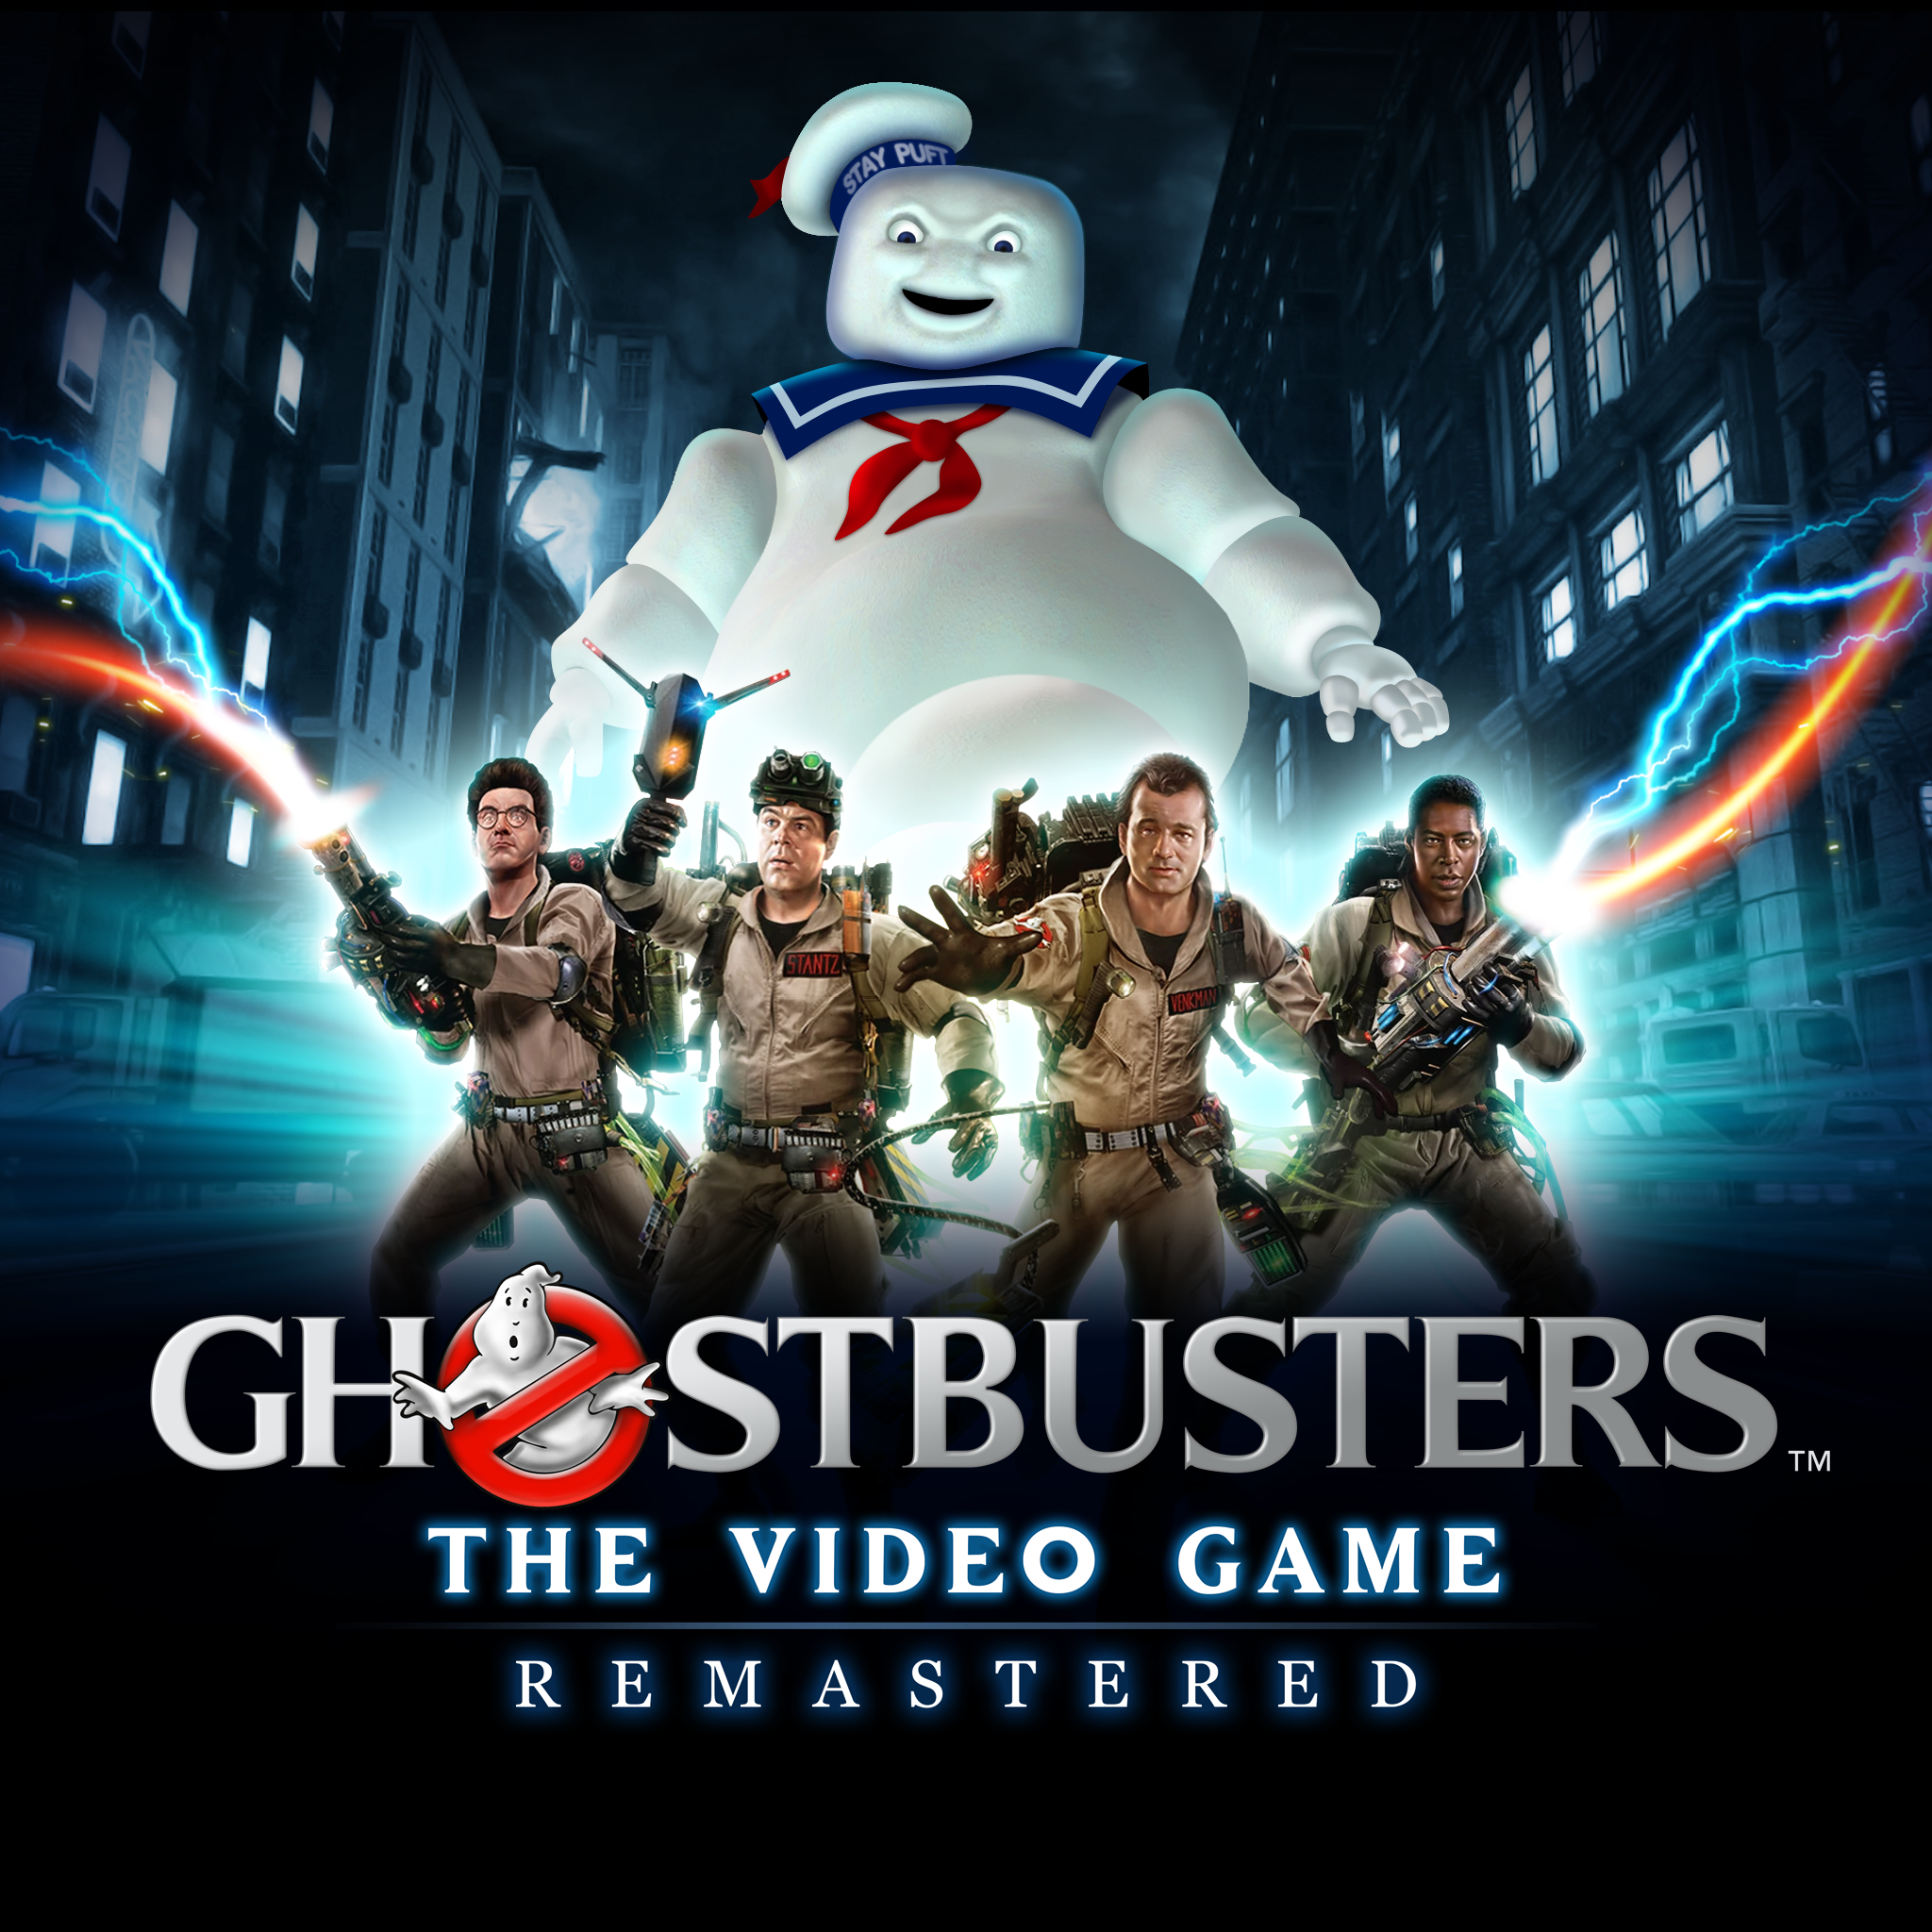 ps4 ghostbusters the video game remastered